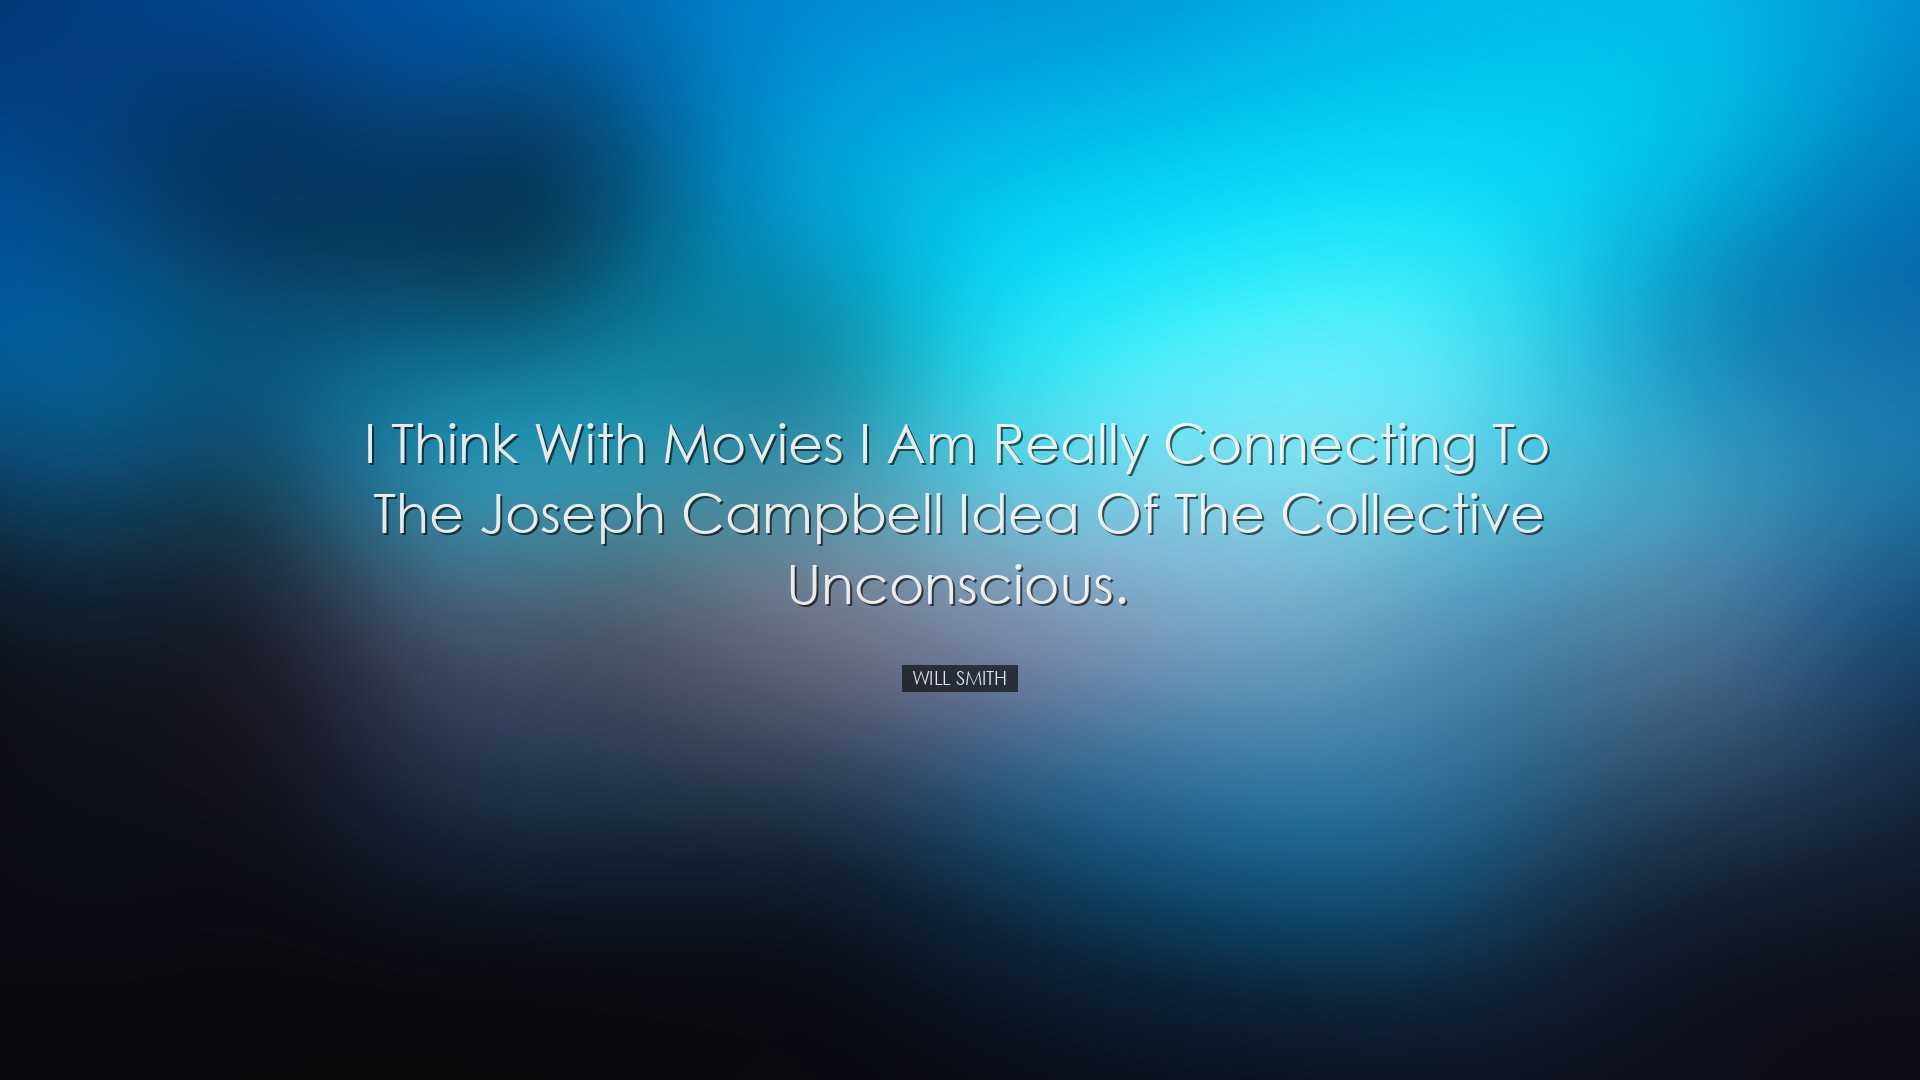 I think with movies I am really connecting to the Joseph Campbell